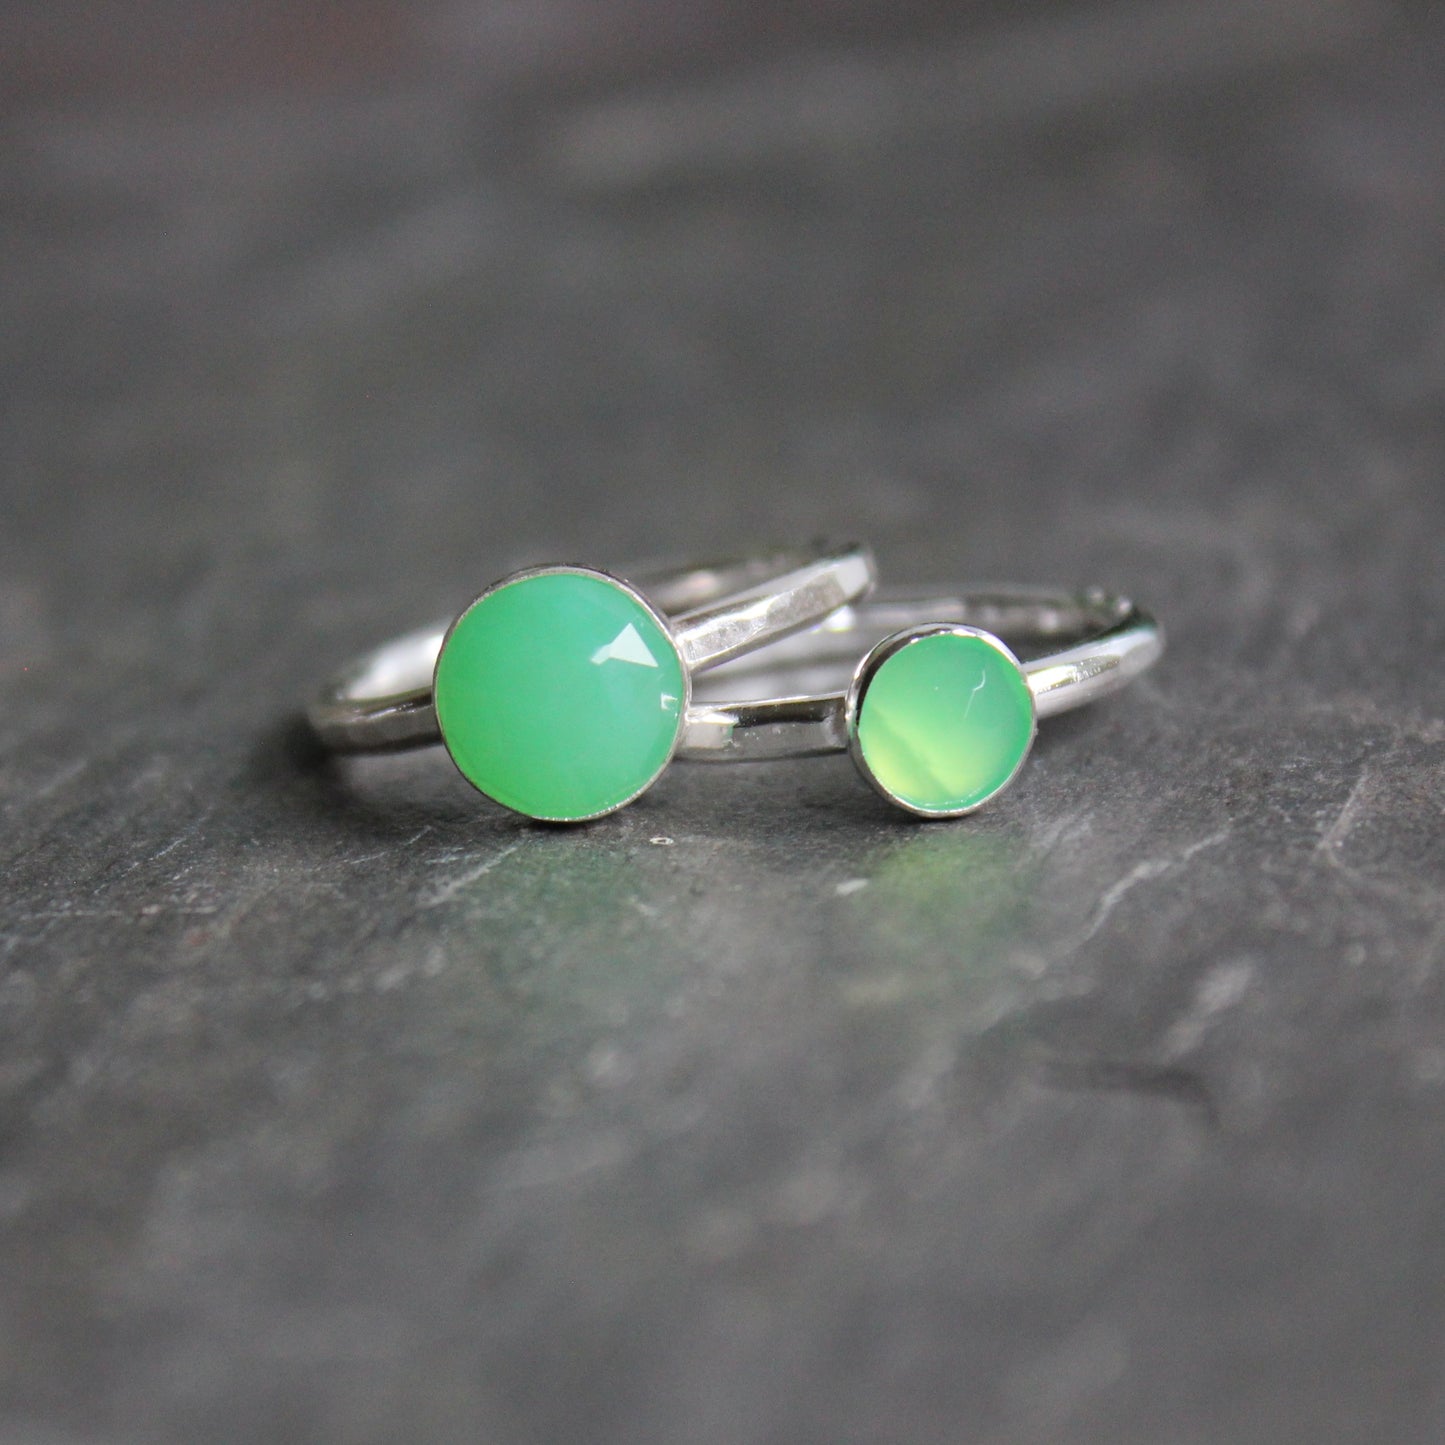 A 6mm or 8mm rose cut round chrysoprase cabochon set in a sterling silver bezel setting on a sturdy silver band. 